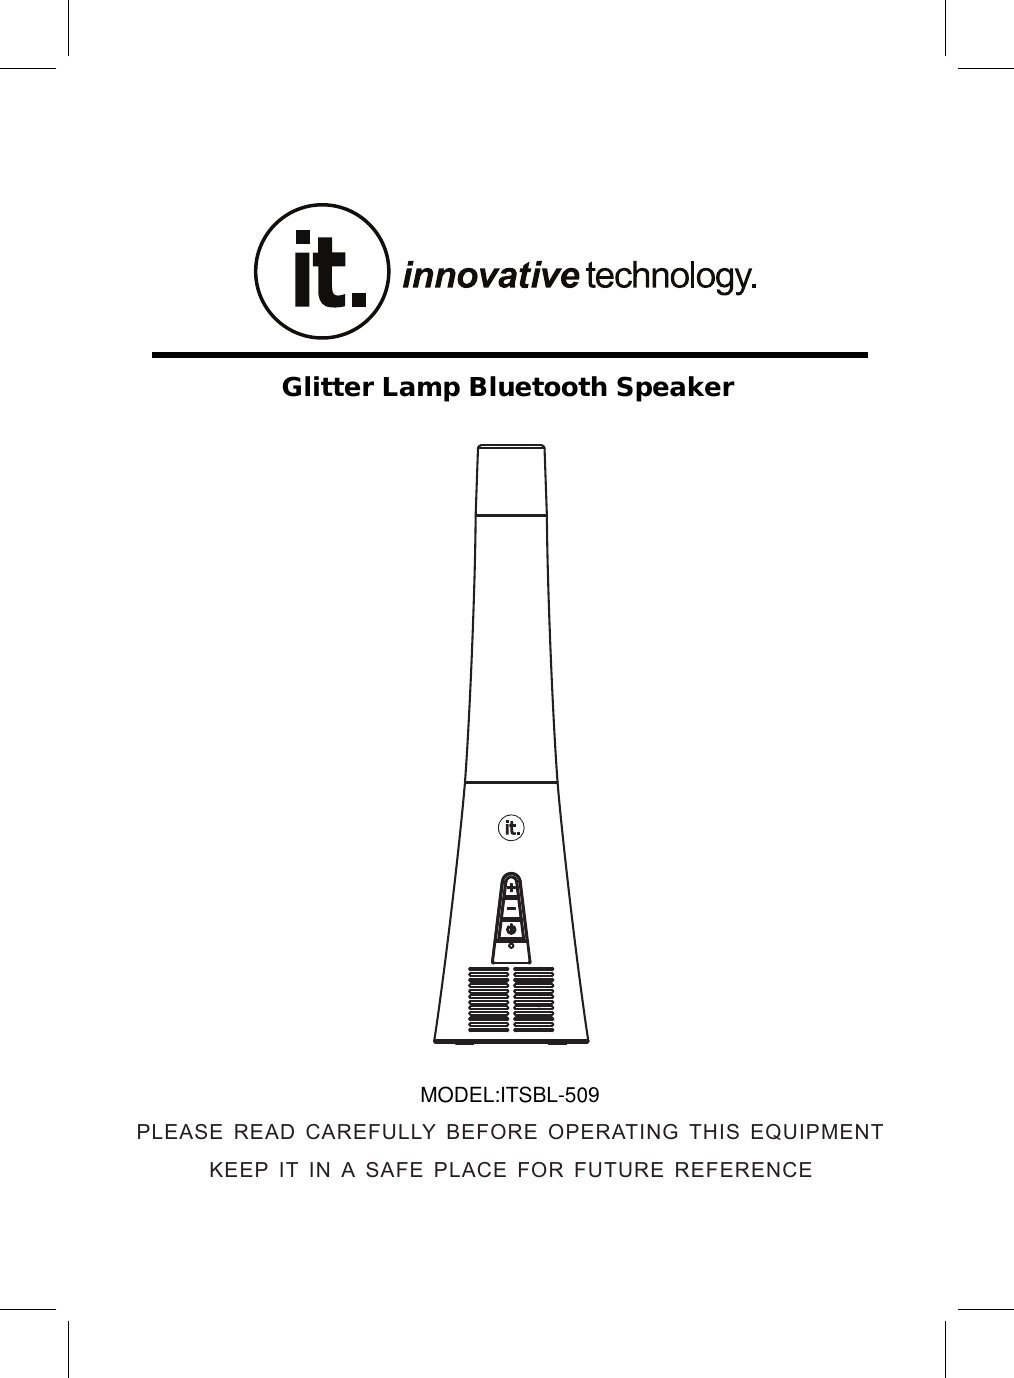 Glitter Lamp Bluetooth SpeakerMODEL:ITSBL-509PLEASE READ CAREFULLY BEFORE OPERATING THIS EQUIPMENT KEEP IT IN A SAFE PLACE FOR FUTURE REFERENCE